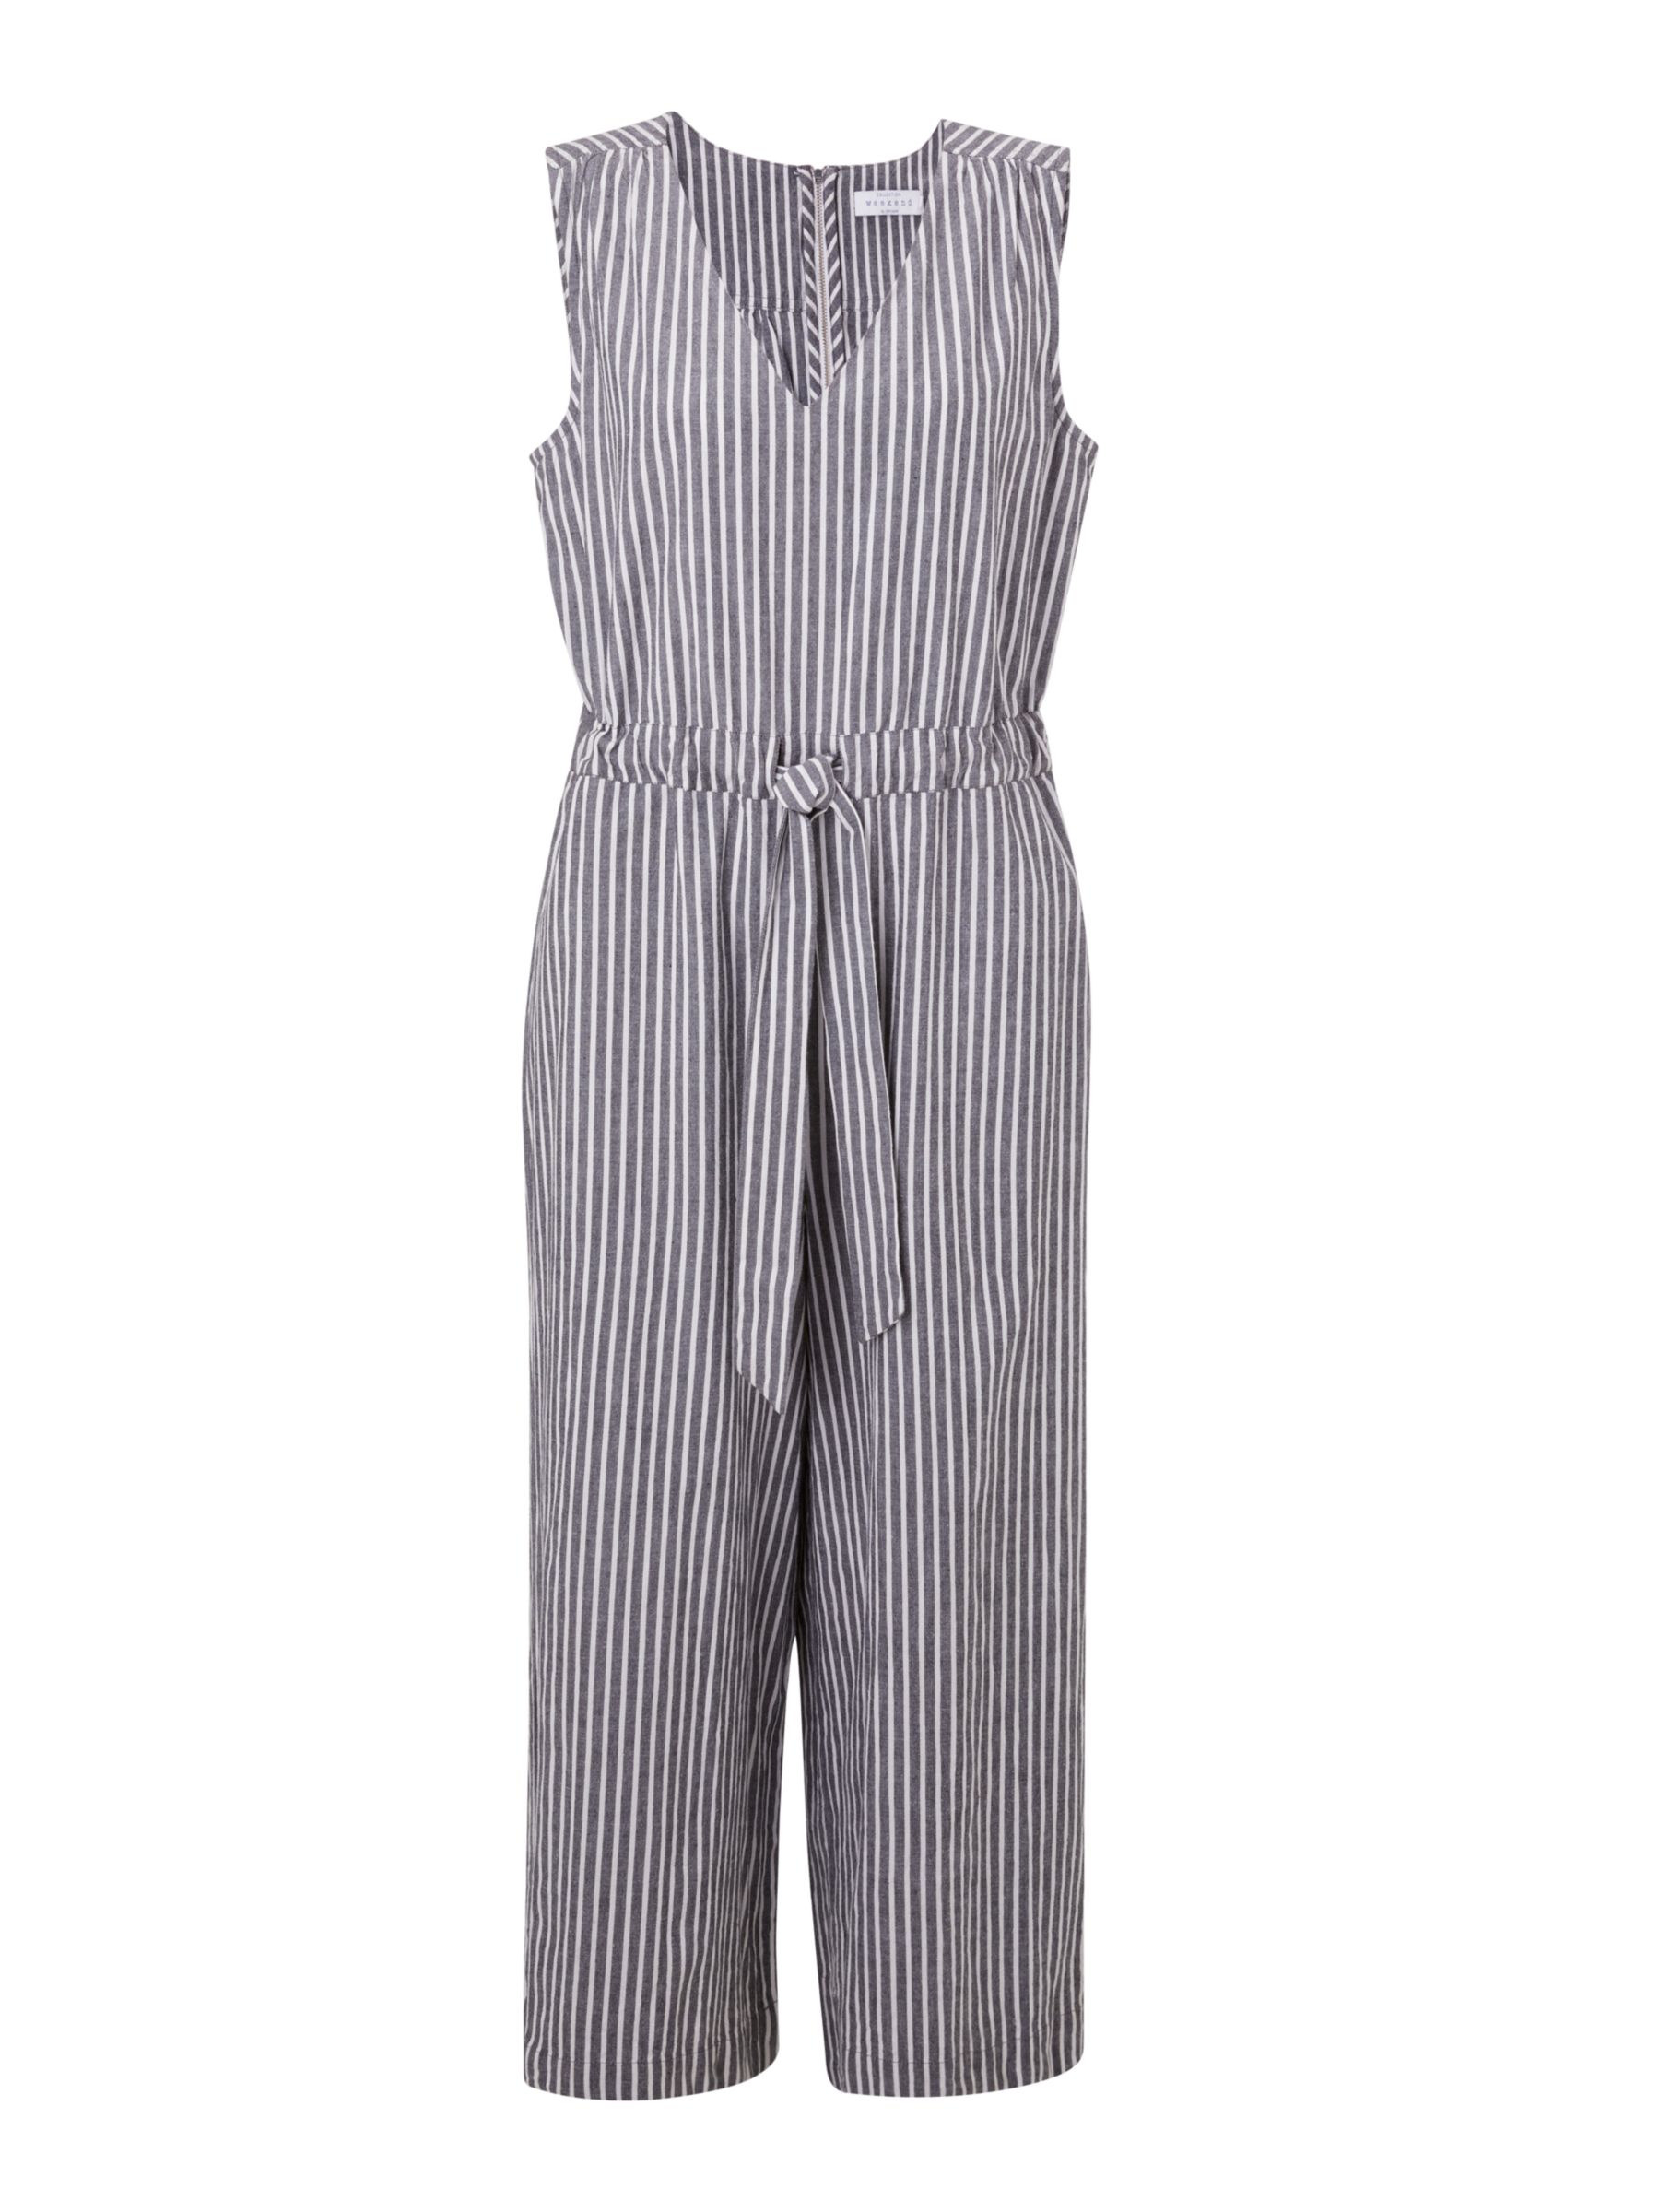 Collection WEEKEND by John Lewis Chambray Cotton Stripe Jumpsuit, Grey ...